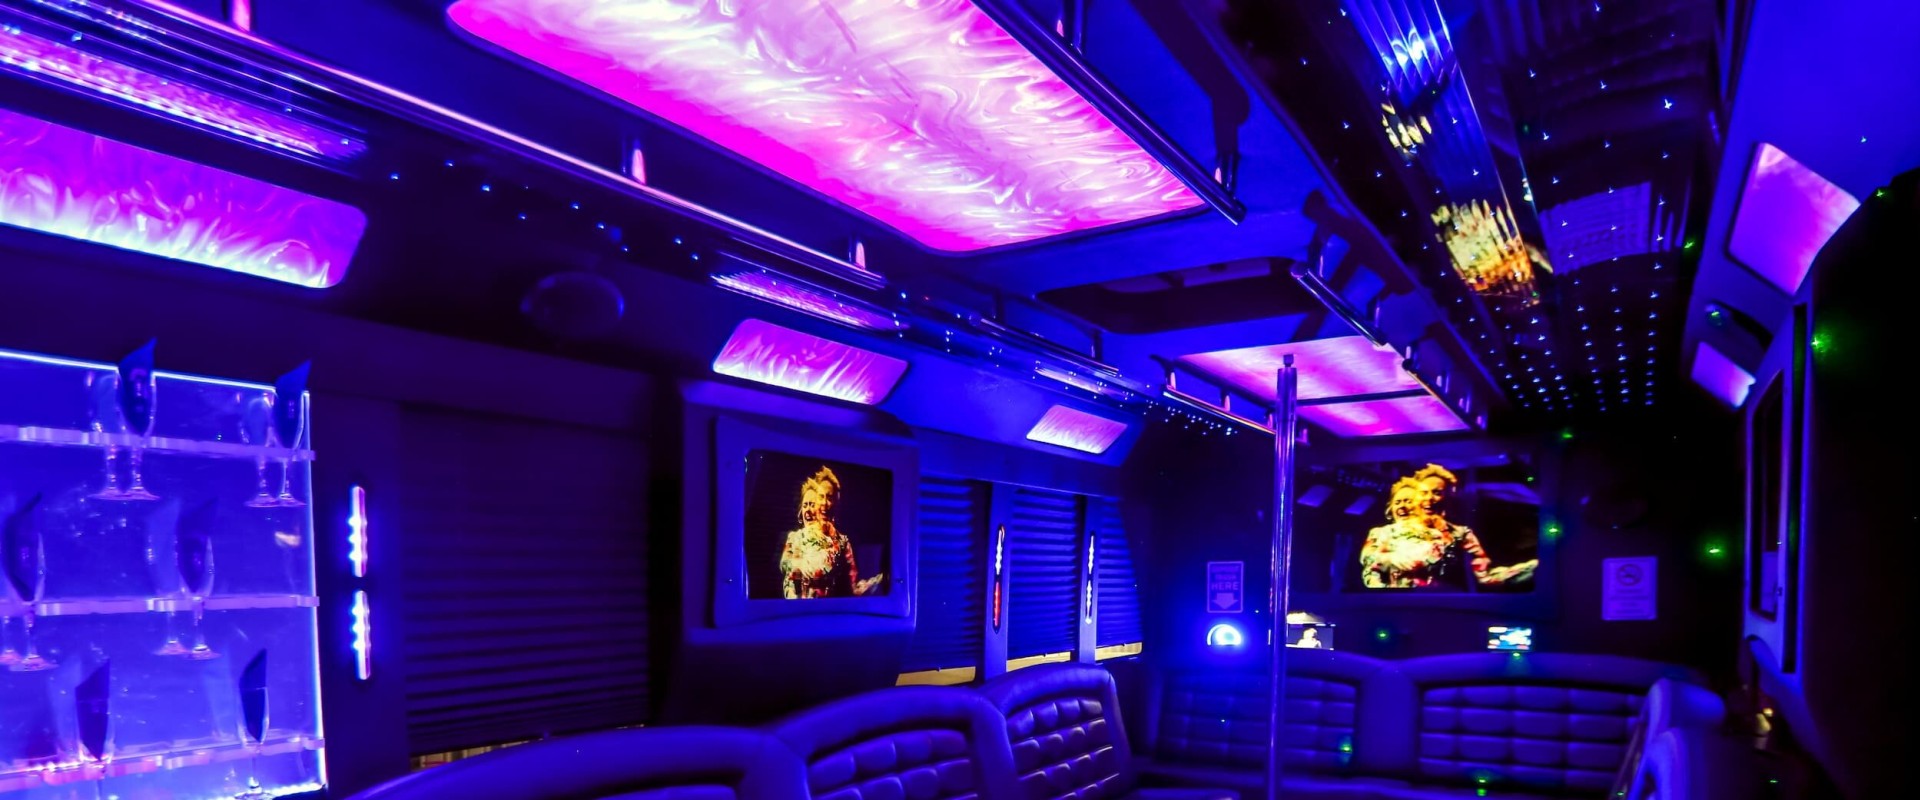 Can you drink on a party bus in florida?